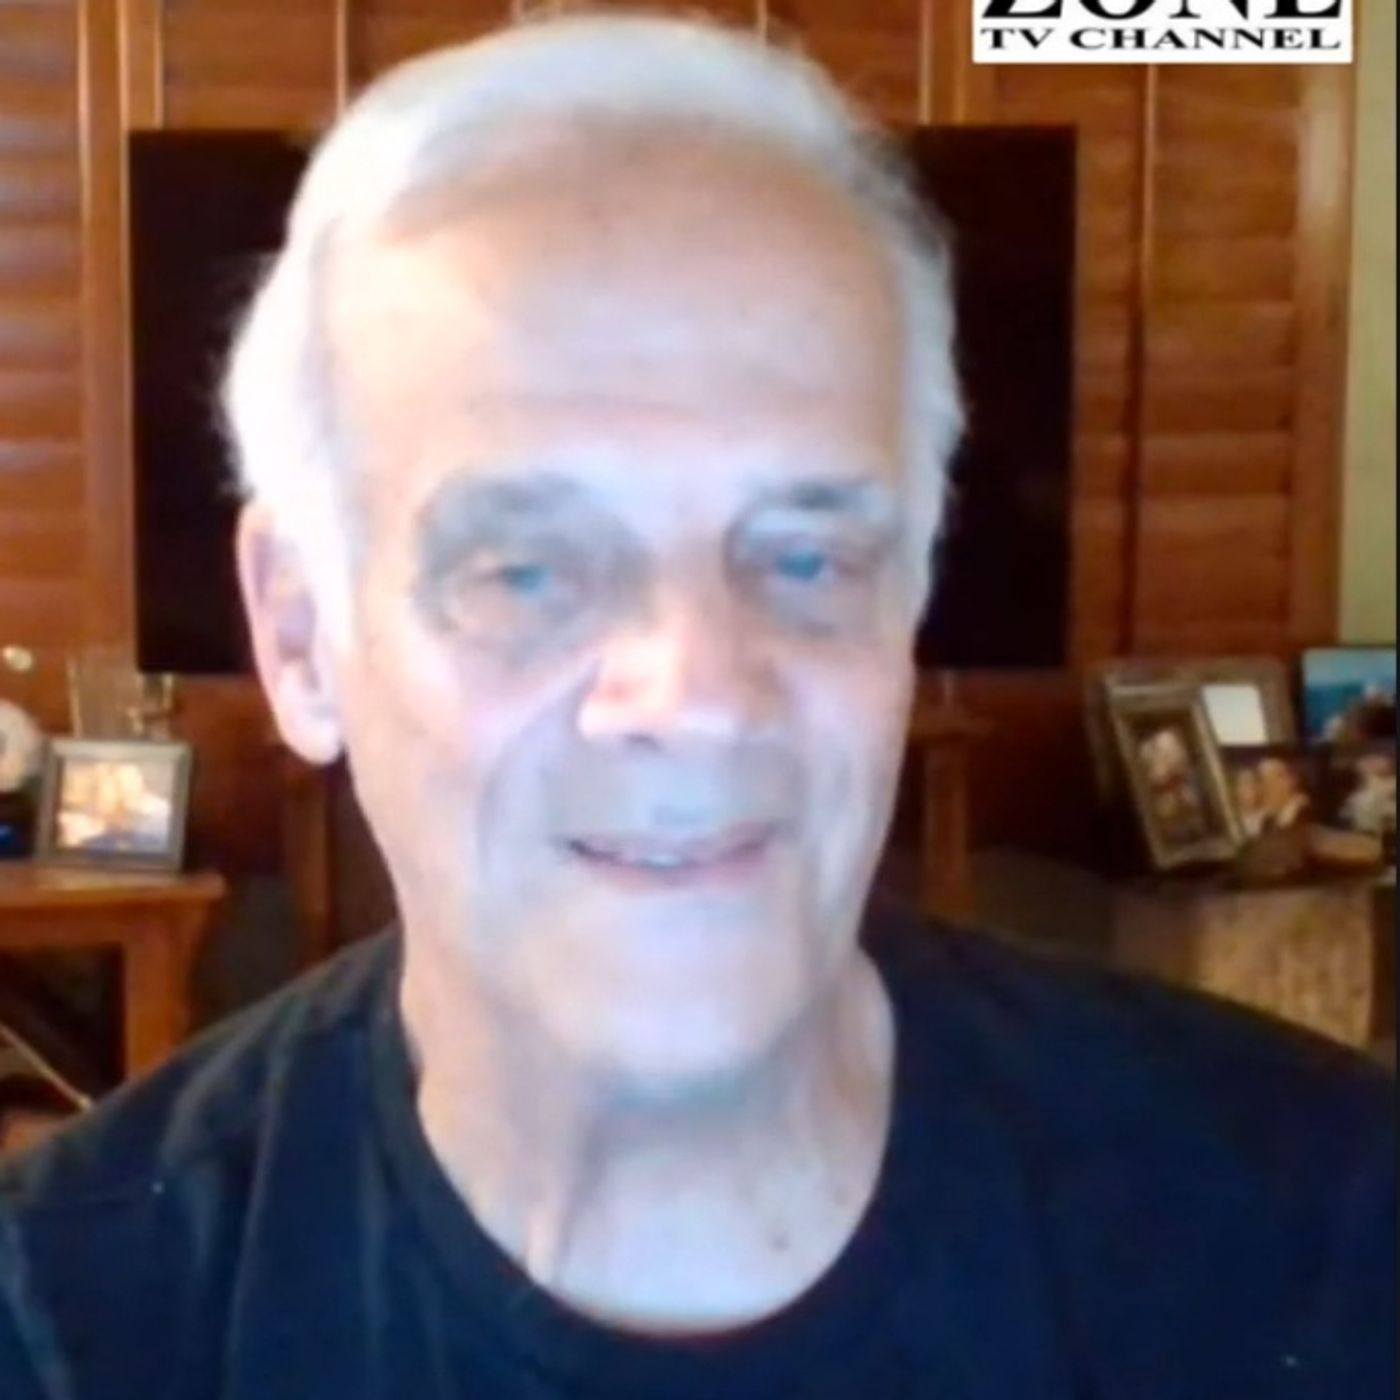 XZTV - Rob McConnell Interviews - DR. GEORGE FAREED, MD - Over Coming COVID Darkness